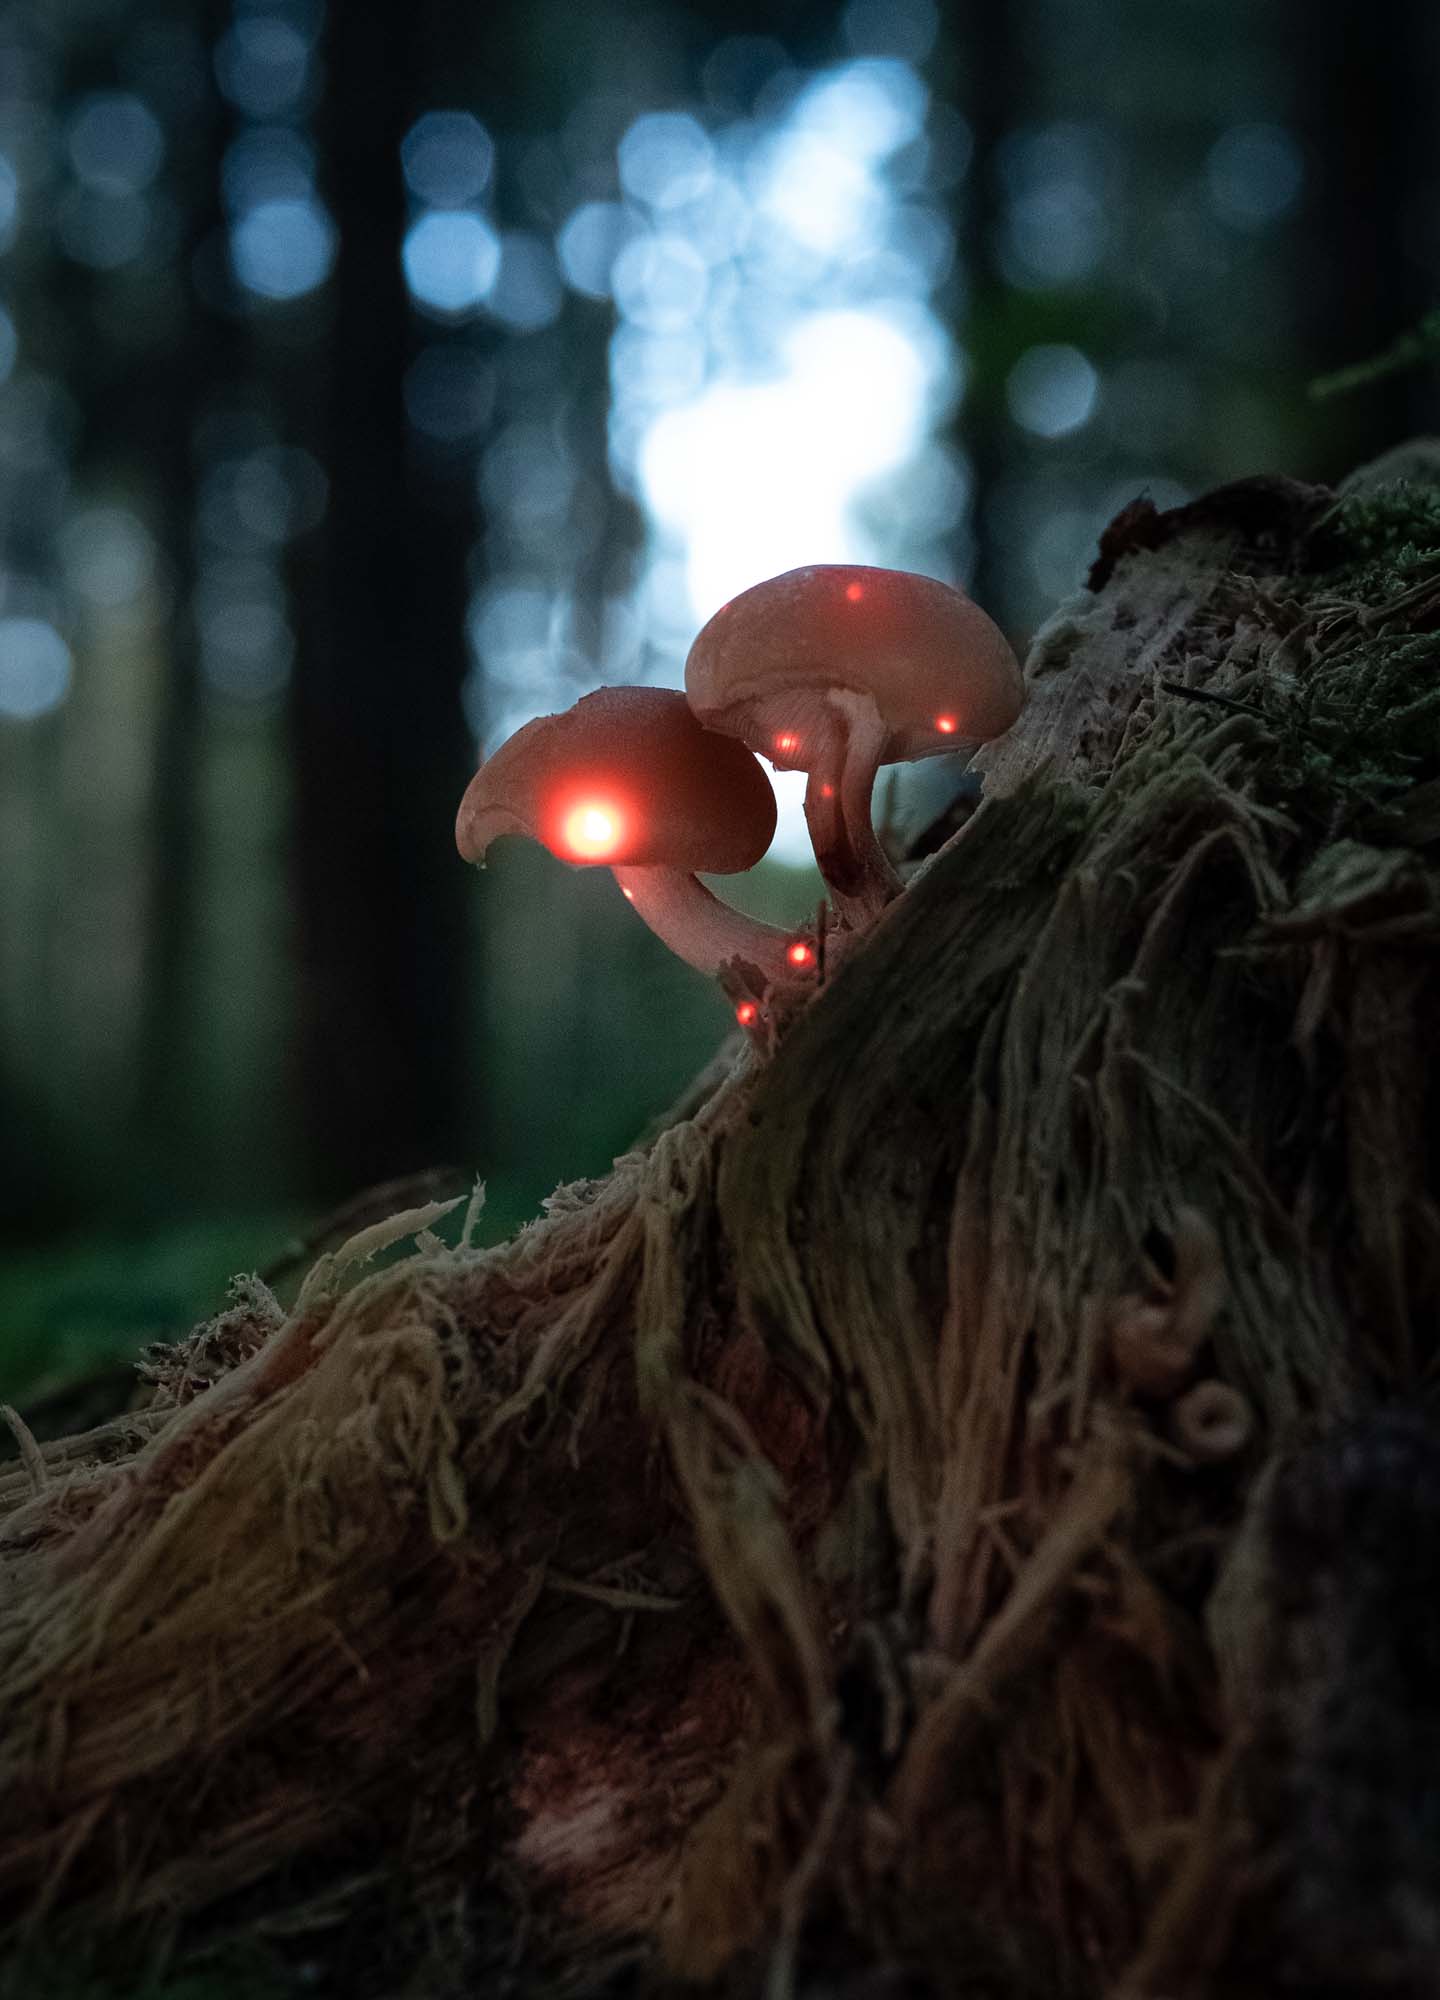 Video installation on two mushrooms with mesmerizing orange visuals